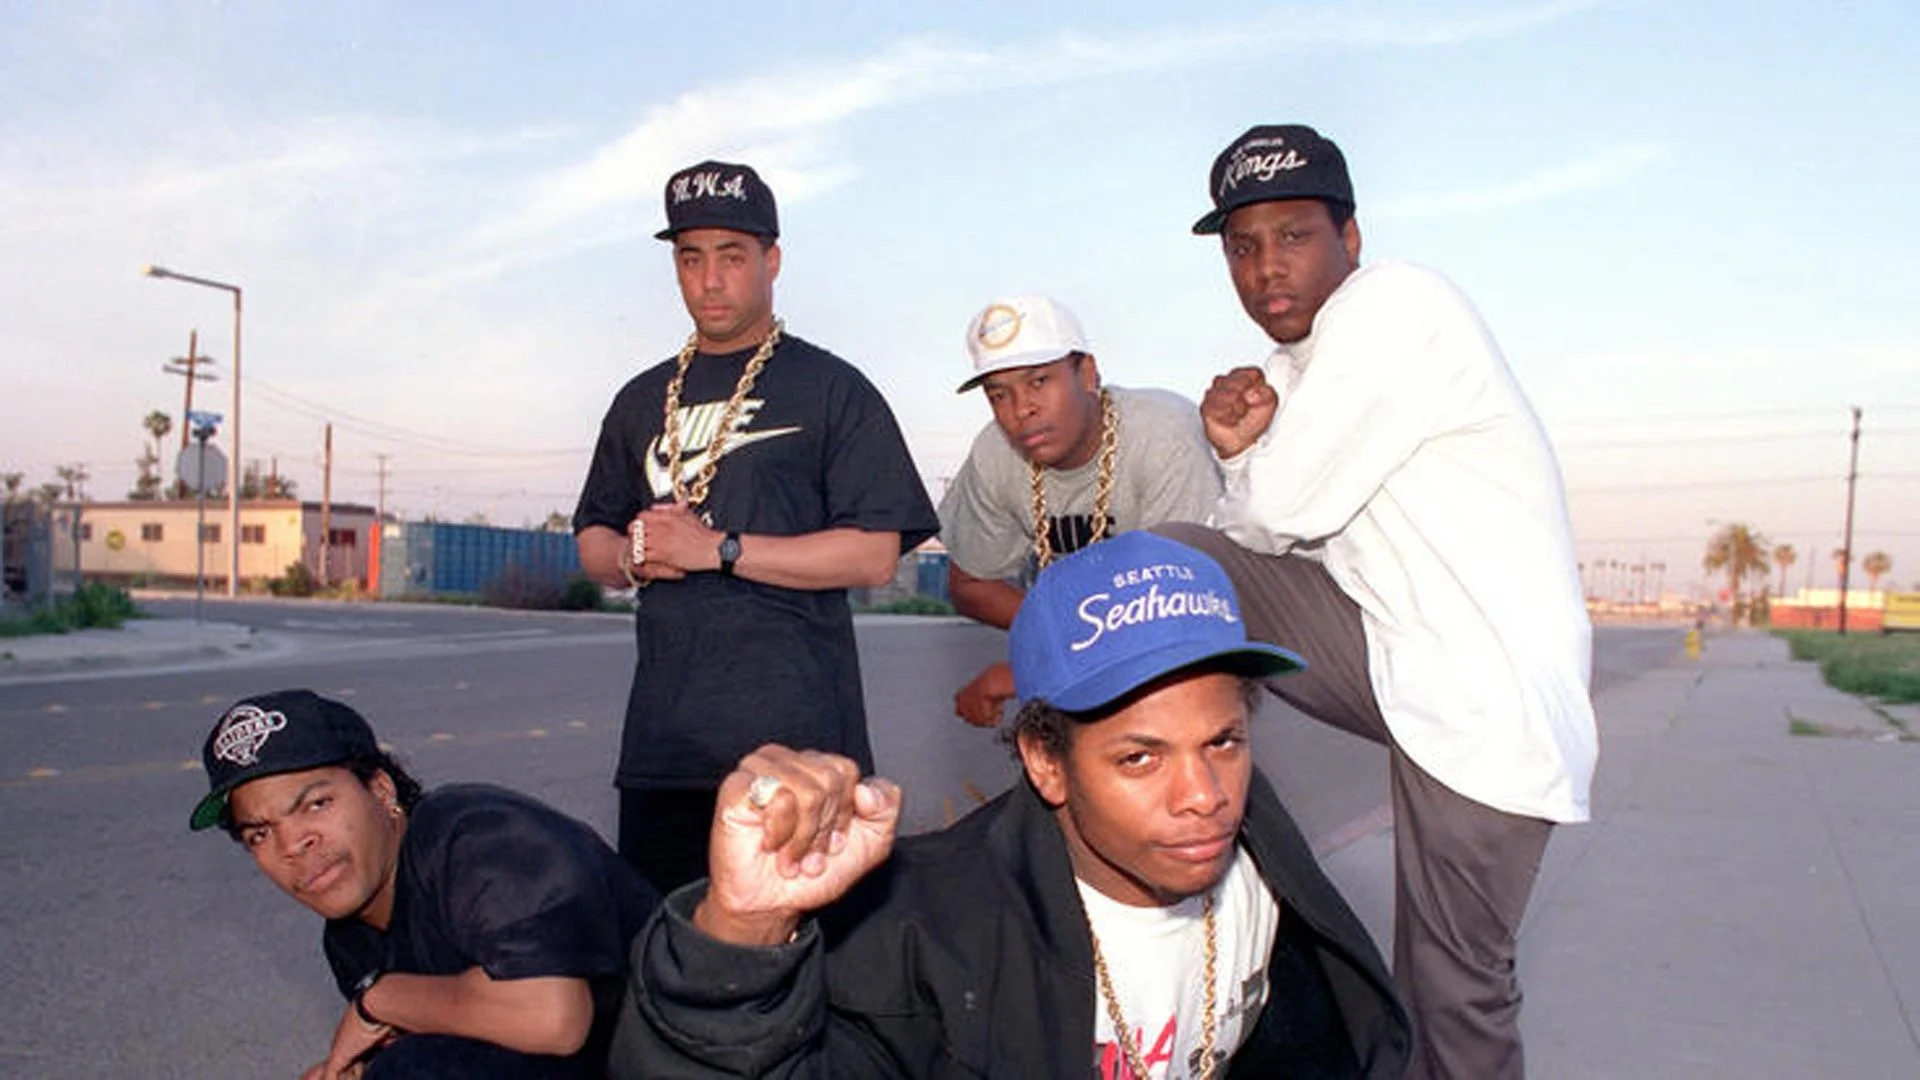 Members of rap group N.W.A are seen in this 1989 file photo. Back, from left D.J. Yella, Dr. Dre MC Ren. Front, from left Ice Cube and Easy E. Credit